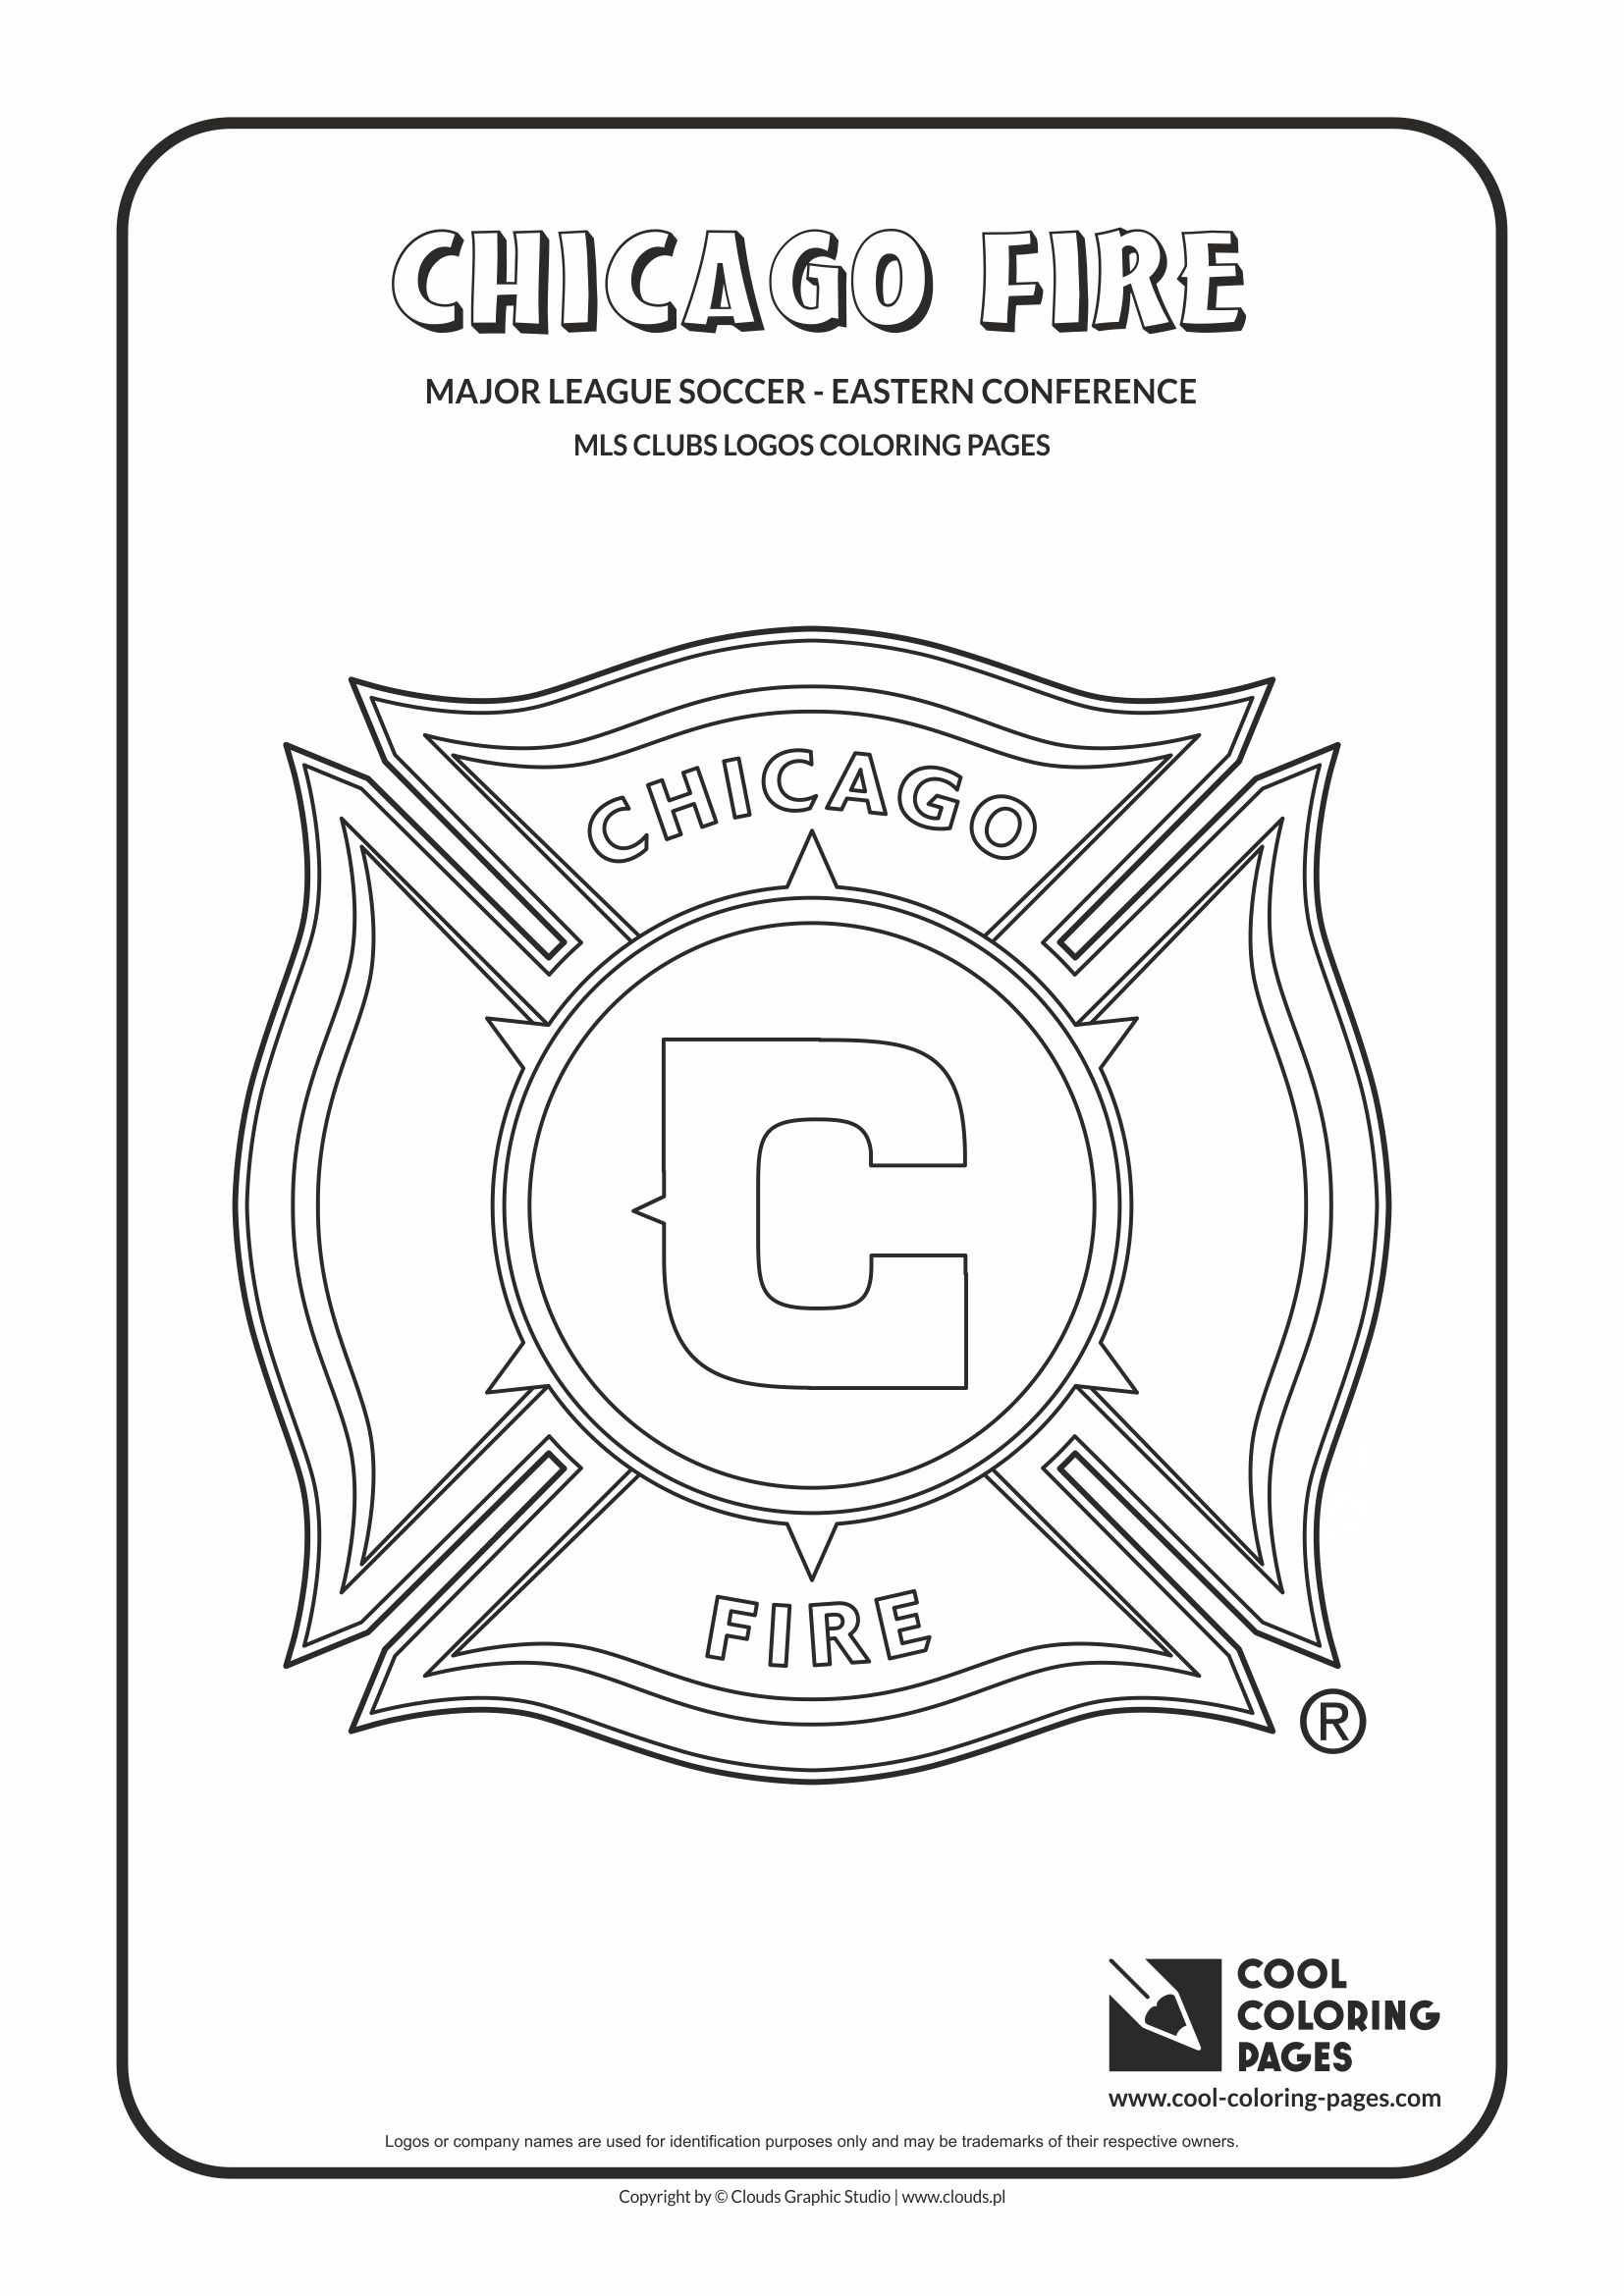 Cool Coloring Pages - Major League Soccer Logos - Eastern Conference / Chicago Fire Soccer Club logo / Coloring page with Chicago Fire Soccer Club logo